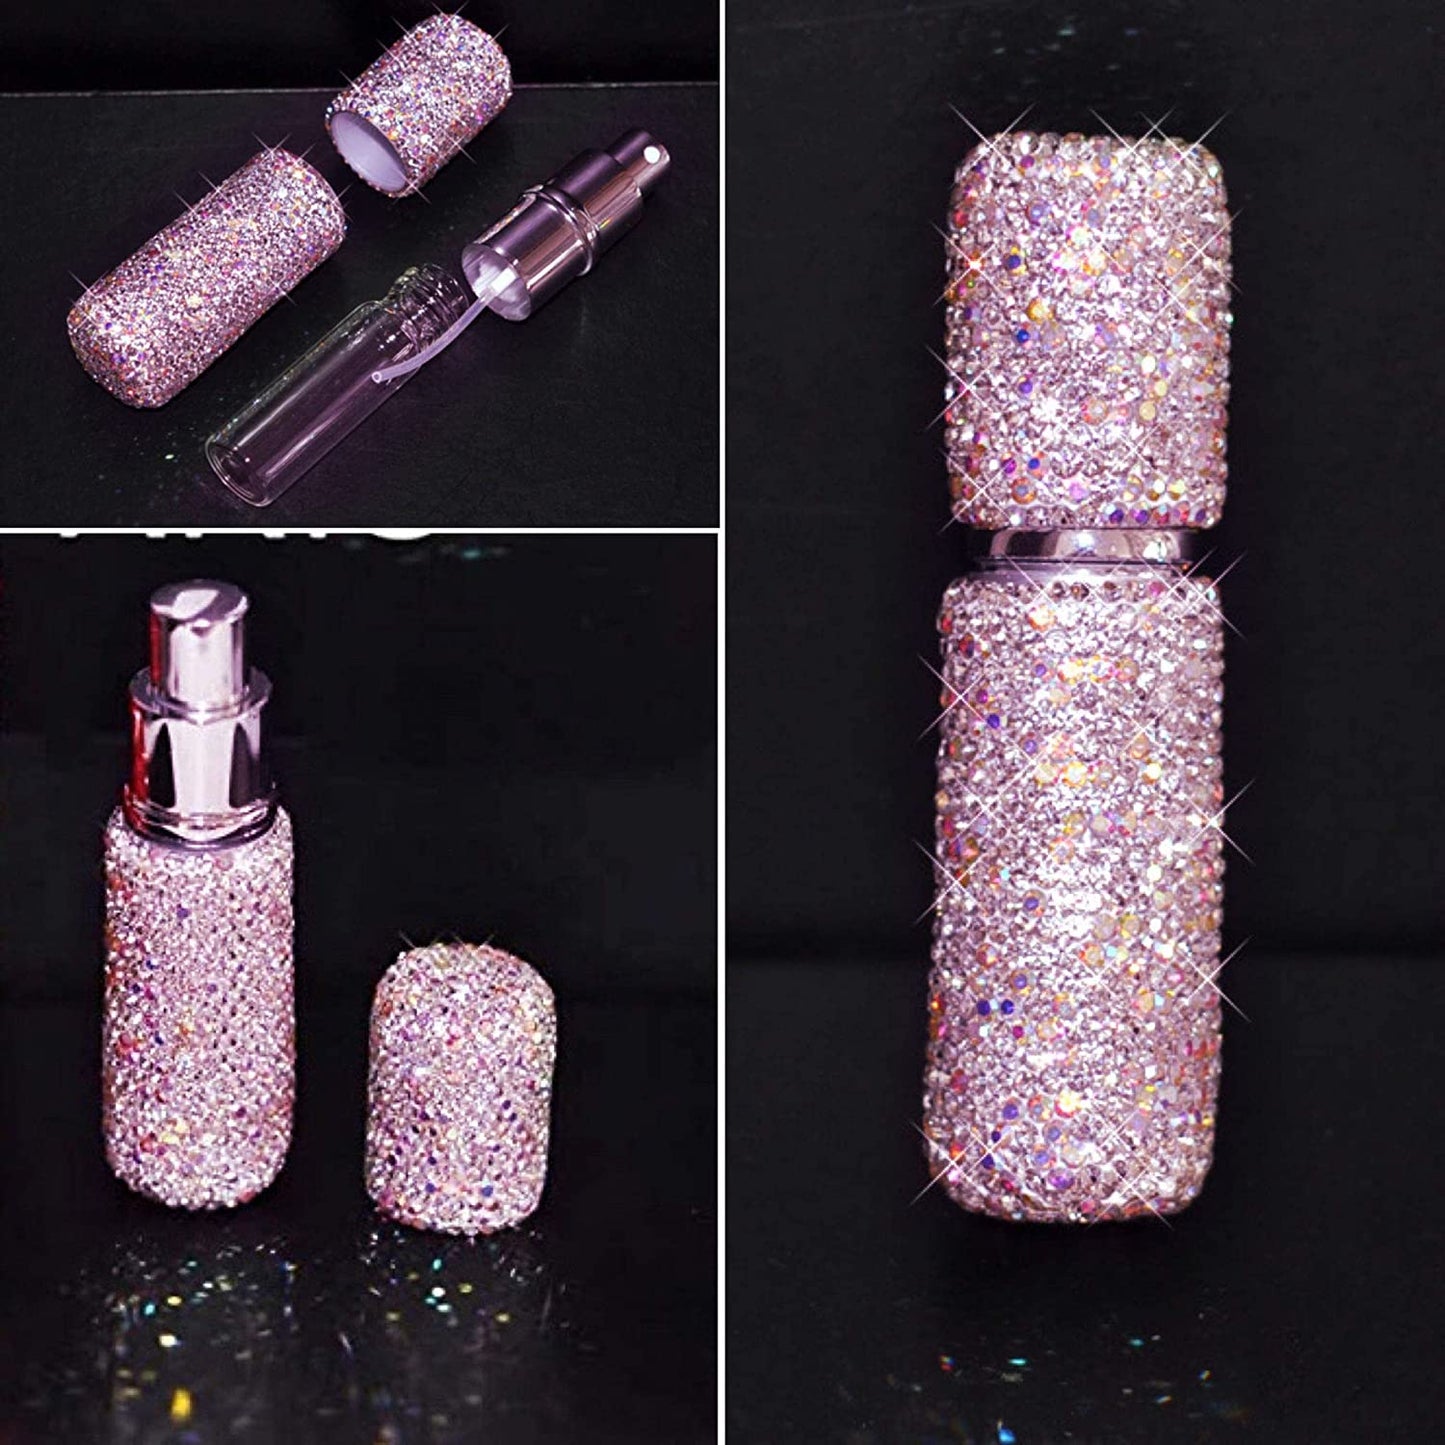 Bling Dazzling Portable Travel Size Perfume Spray, Fine Mist Hair Sprayer Toiletry, Suitable for Liquid, Refillable and Reusable Bottle Container